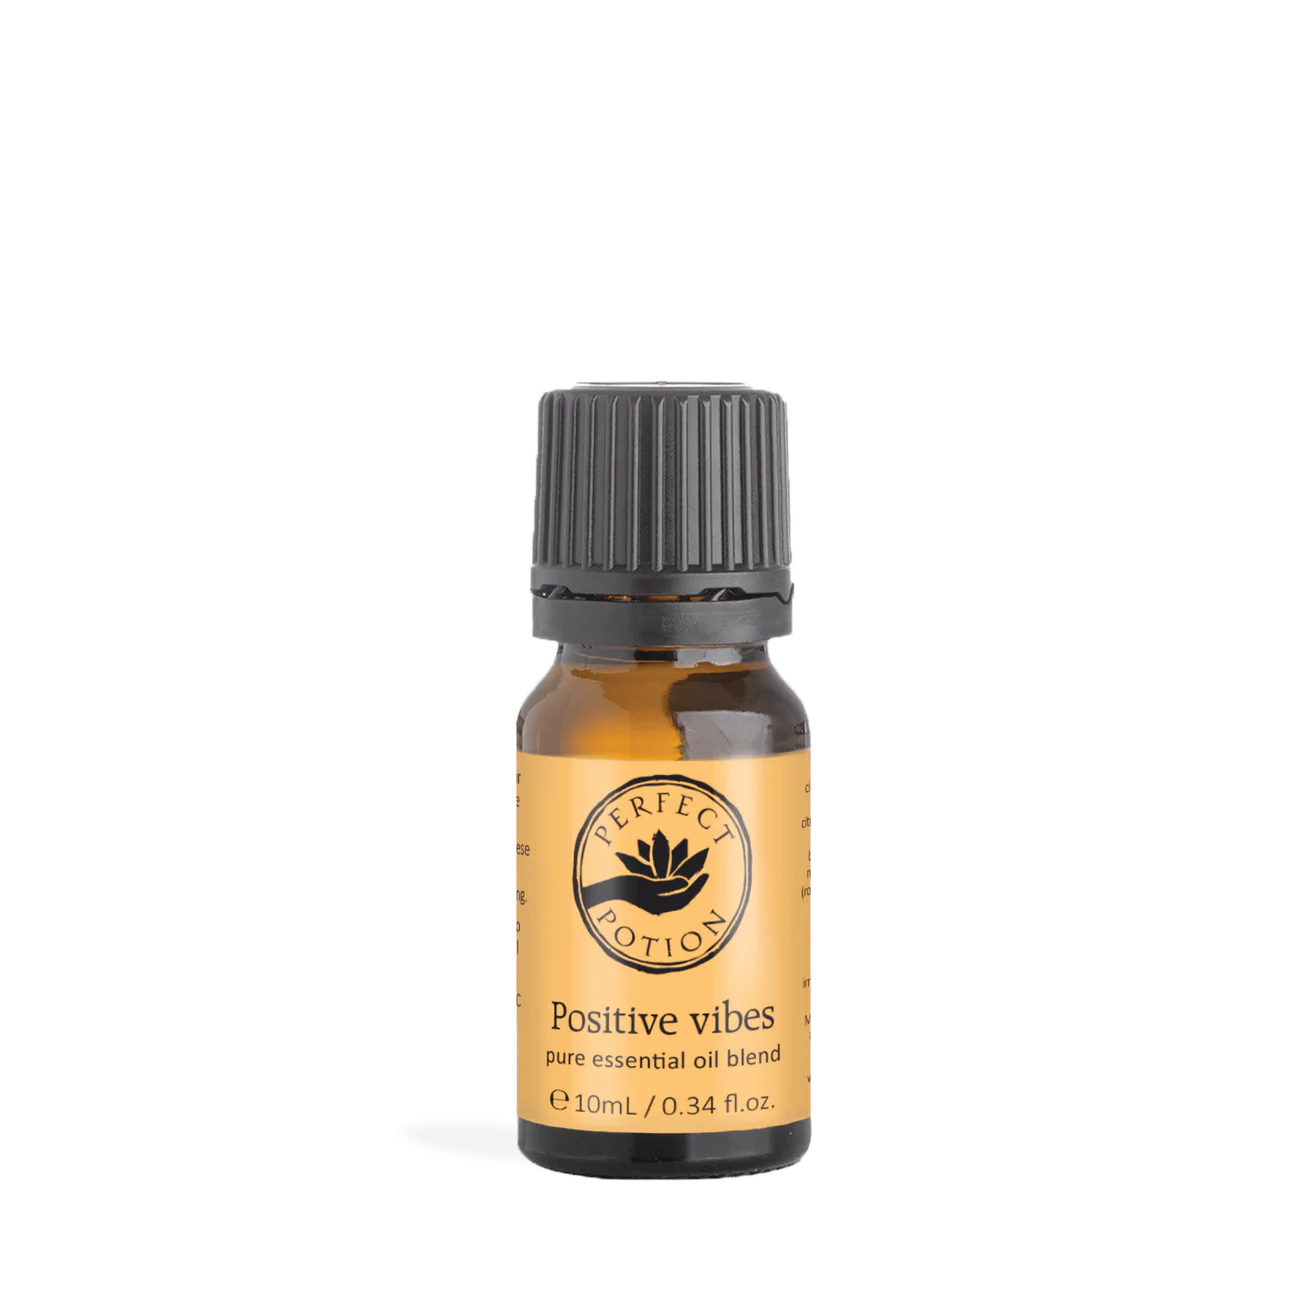 A bottle of Positive Vibes Blend essential oil, featuring a label with vibrant colors and the blend's uplifting ingredients.